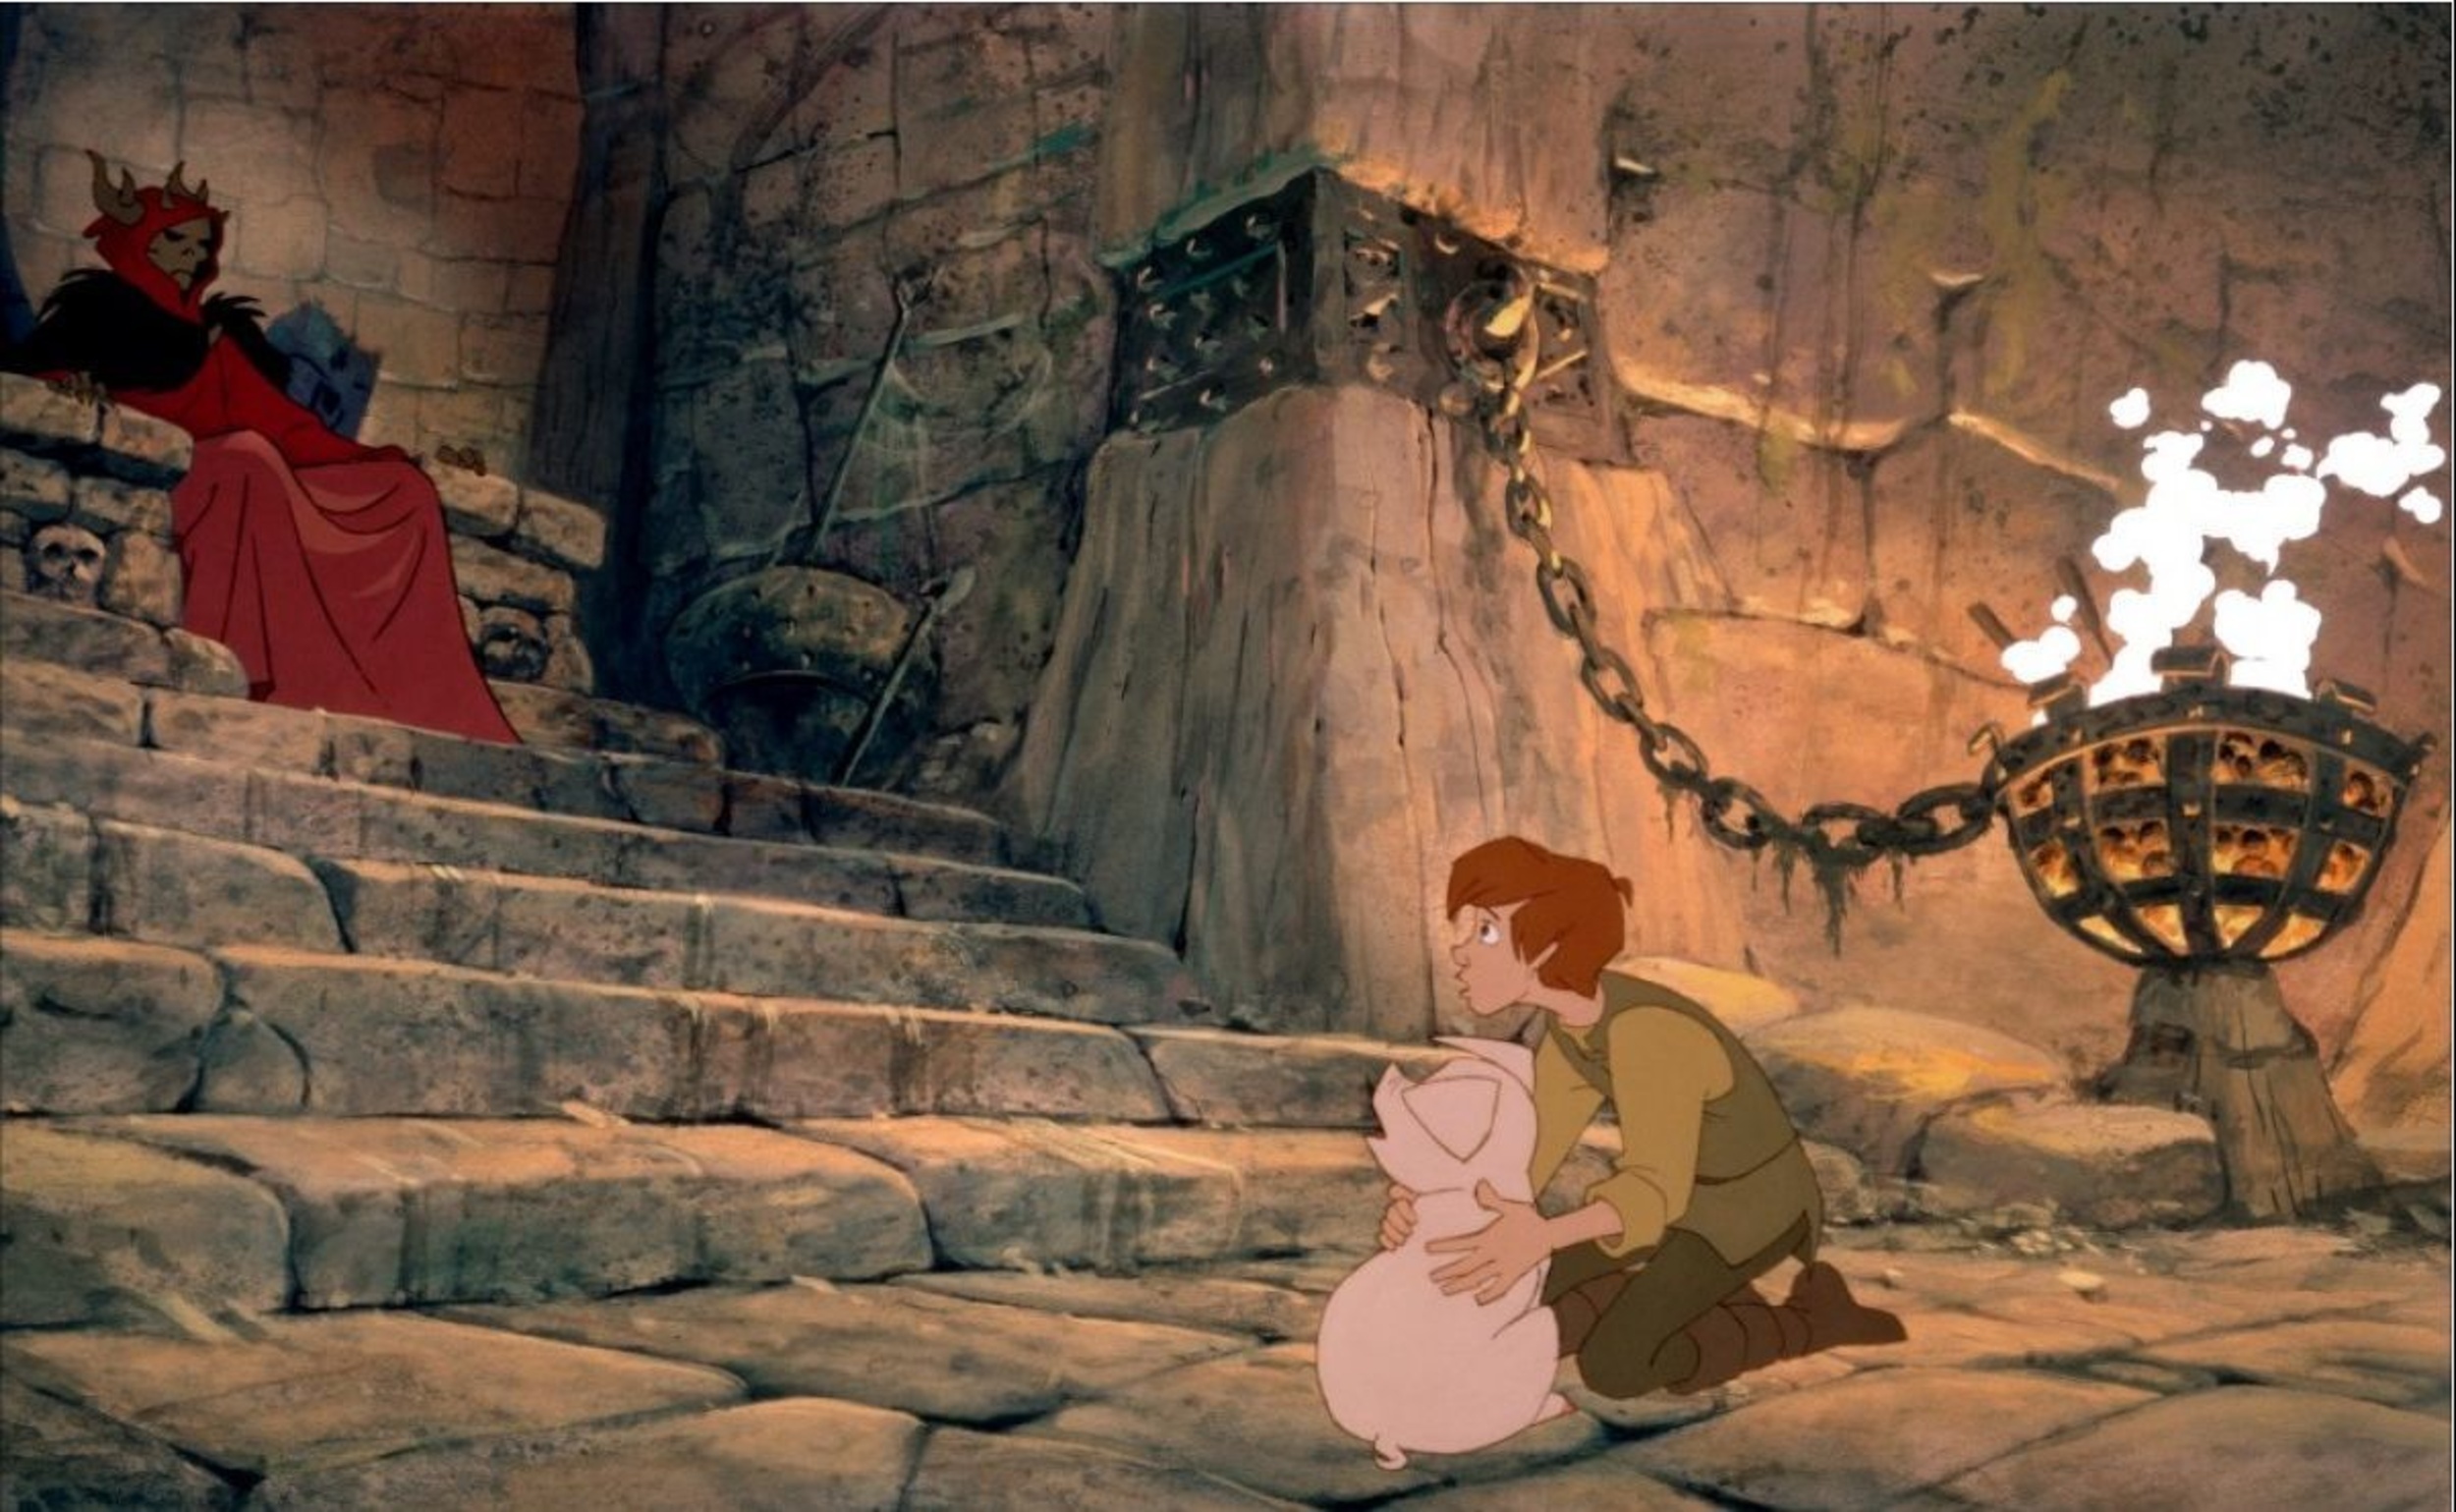 <p>Though it was quite a failure on its initial release, <span><em>The Black Cauldron</em> </span>has gone on to be regarded as one of Disney’s truly underrated gems. Not only does it focus on a young man’s (Taran) epic quest, but it also features one of the most deliciously evil villains to have emerged from a Disney film in the person of the Horned King. The film’s lack of success at the box office ensured that the studio went in some very different directions in future years, and this is just one of the reasons that this extraordinary film is worth revisiting and enjoying in the present.</p><p><a href='https://www.msn.com/en-us/community/channel/vid-cj9pqbr0vn9in2b6ddcd8sfgpfq6x6utp44fssrv6mc2gtybw0us'>Follow us on MSN to see more of our exclusive entertainment content.</a></p>